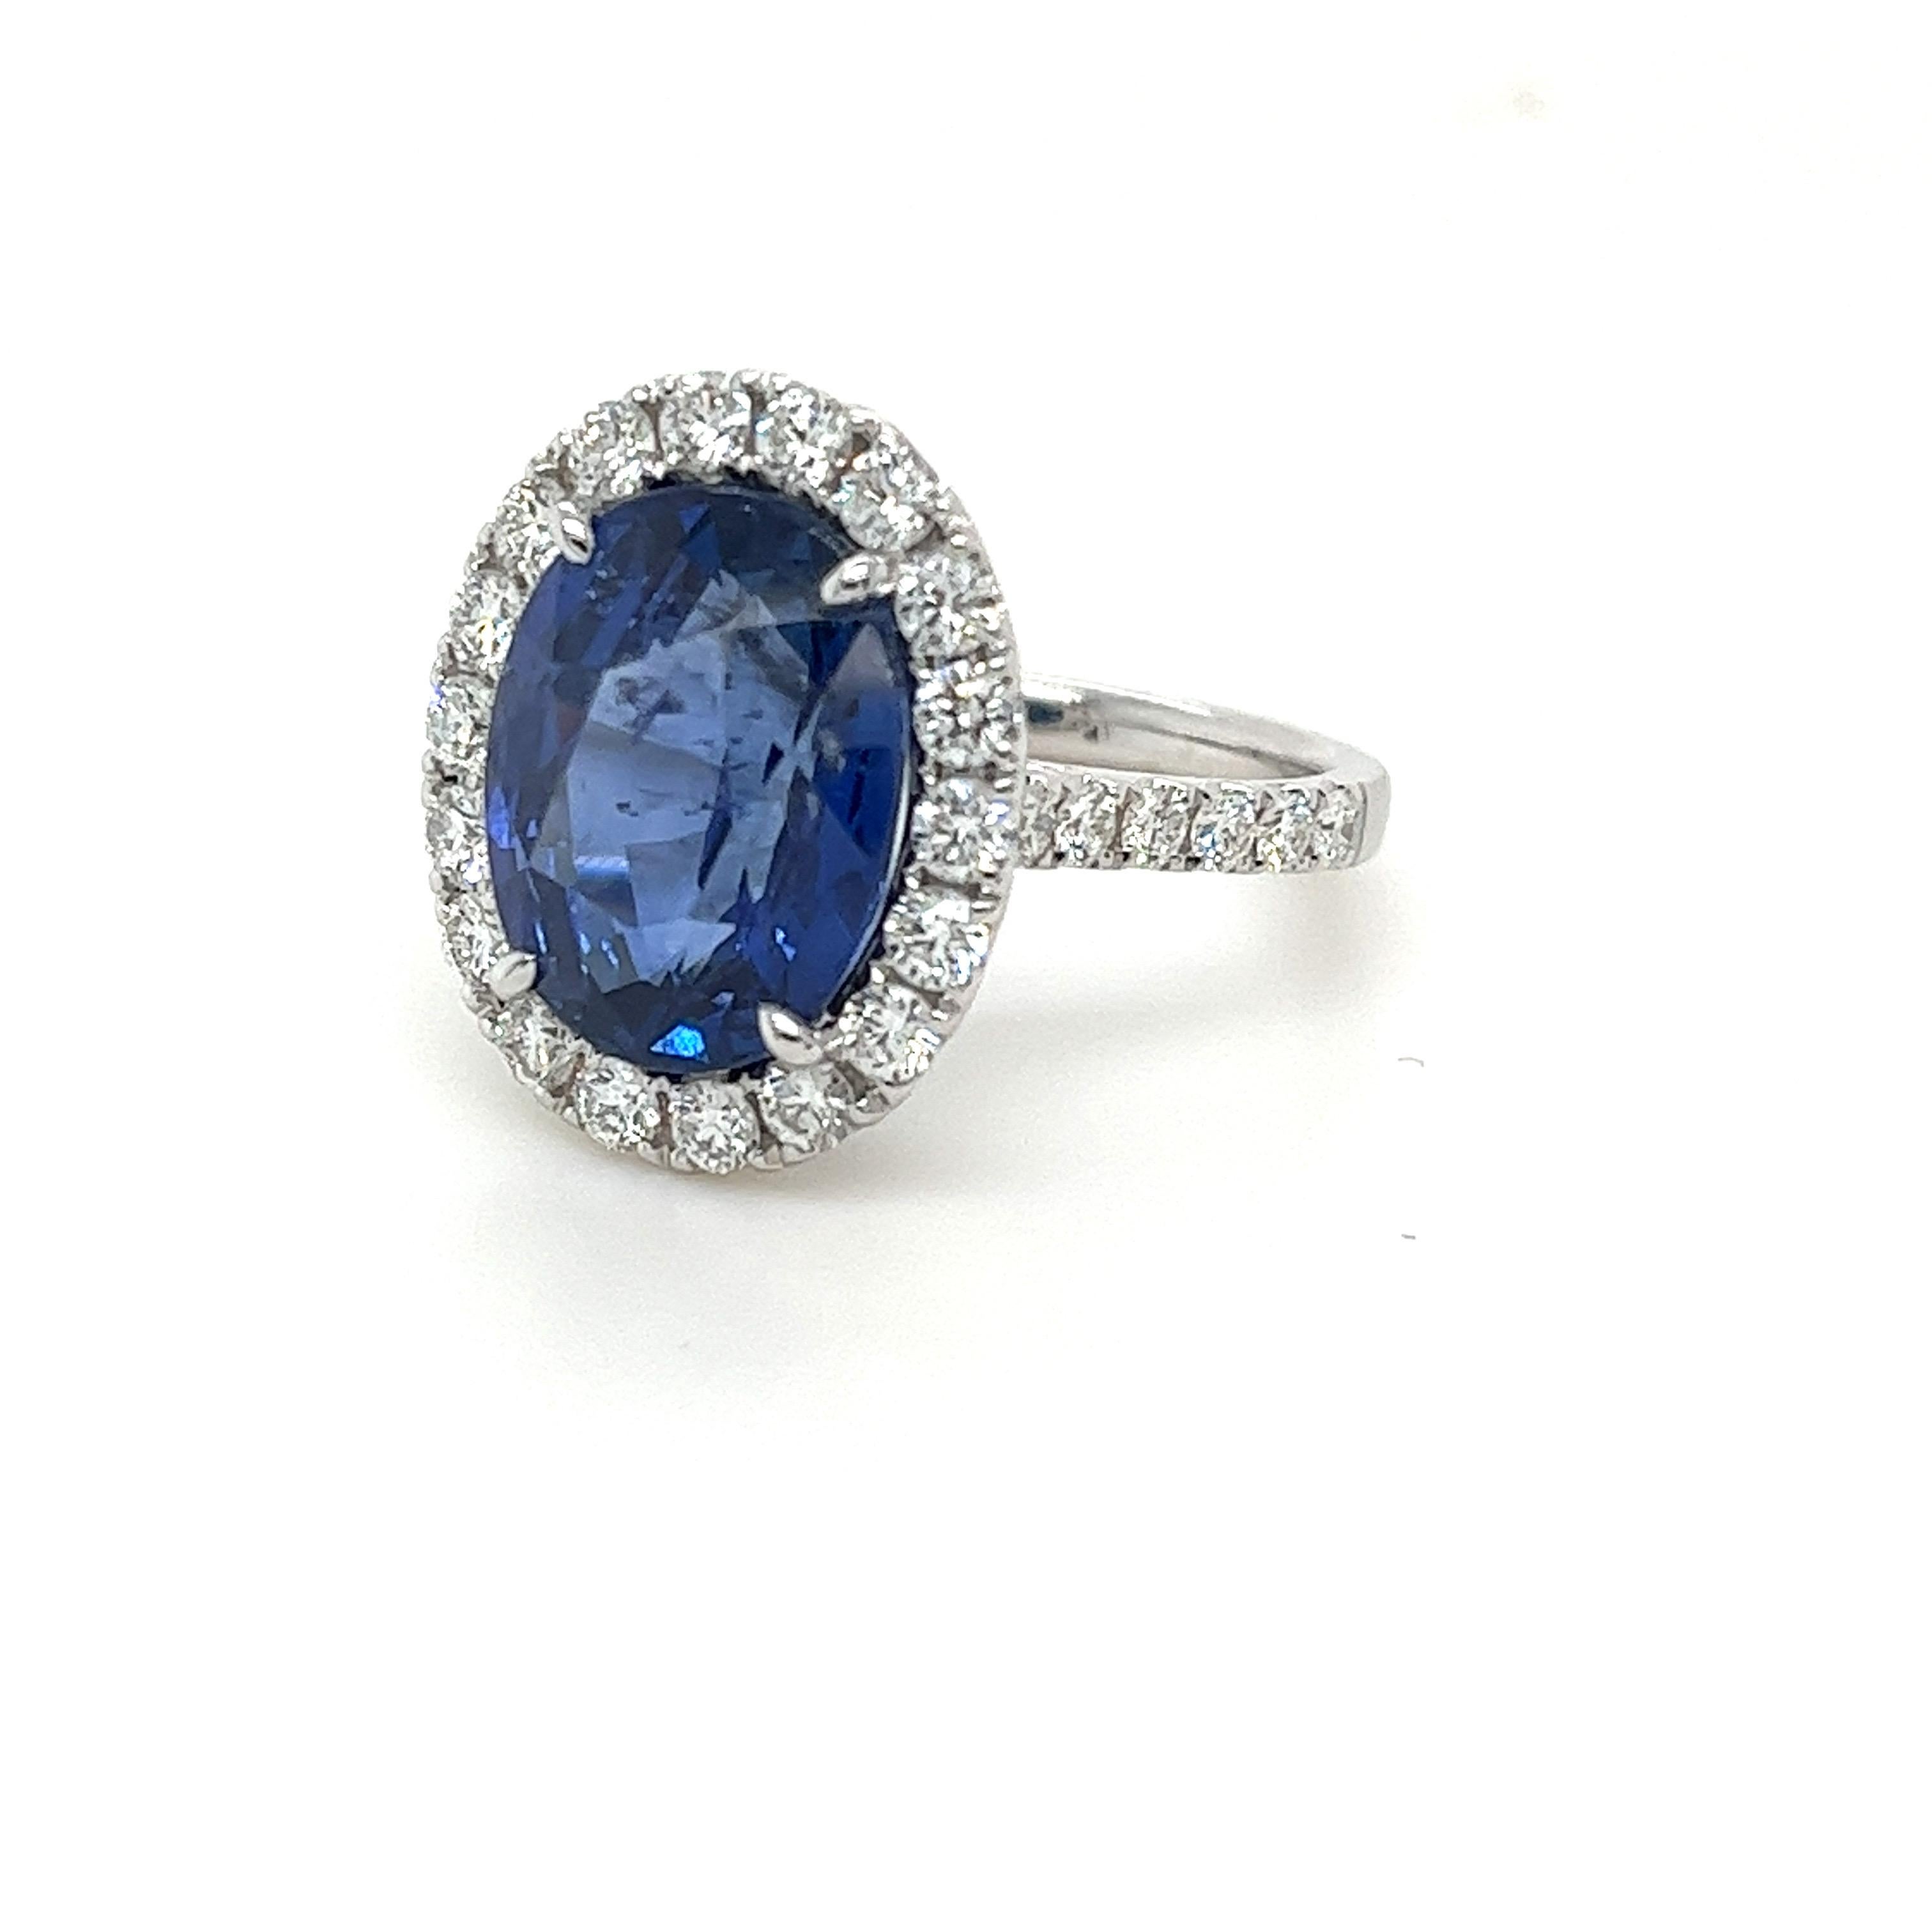 CDC certified oval Ceylon Sapphire weighing 7.83 carats
Measuring (13.18x10.34x6.59) mm
Diamonds weighing 1.14 carats
G-SI1
Set in 18k white gold ring
5.77 g